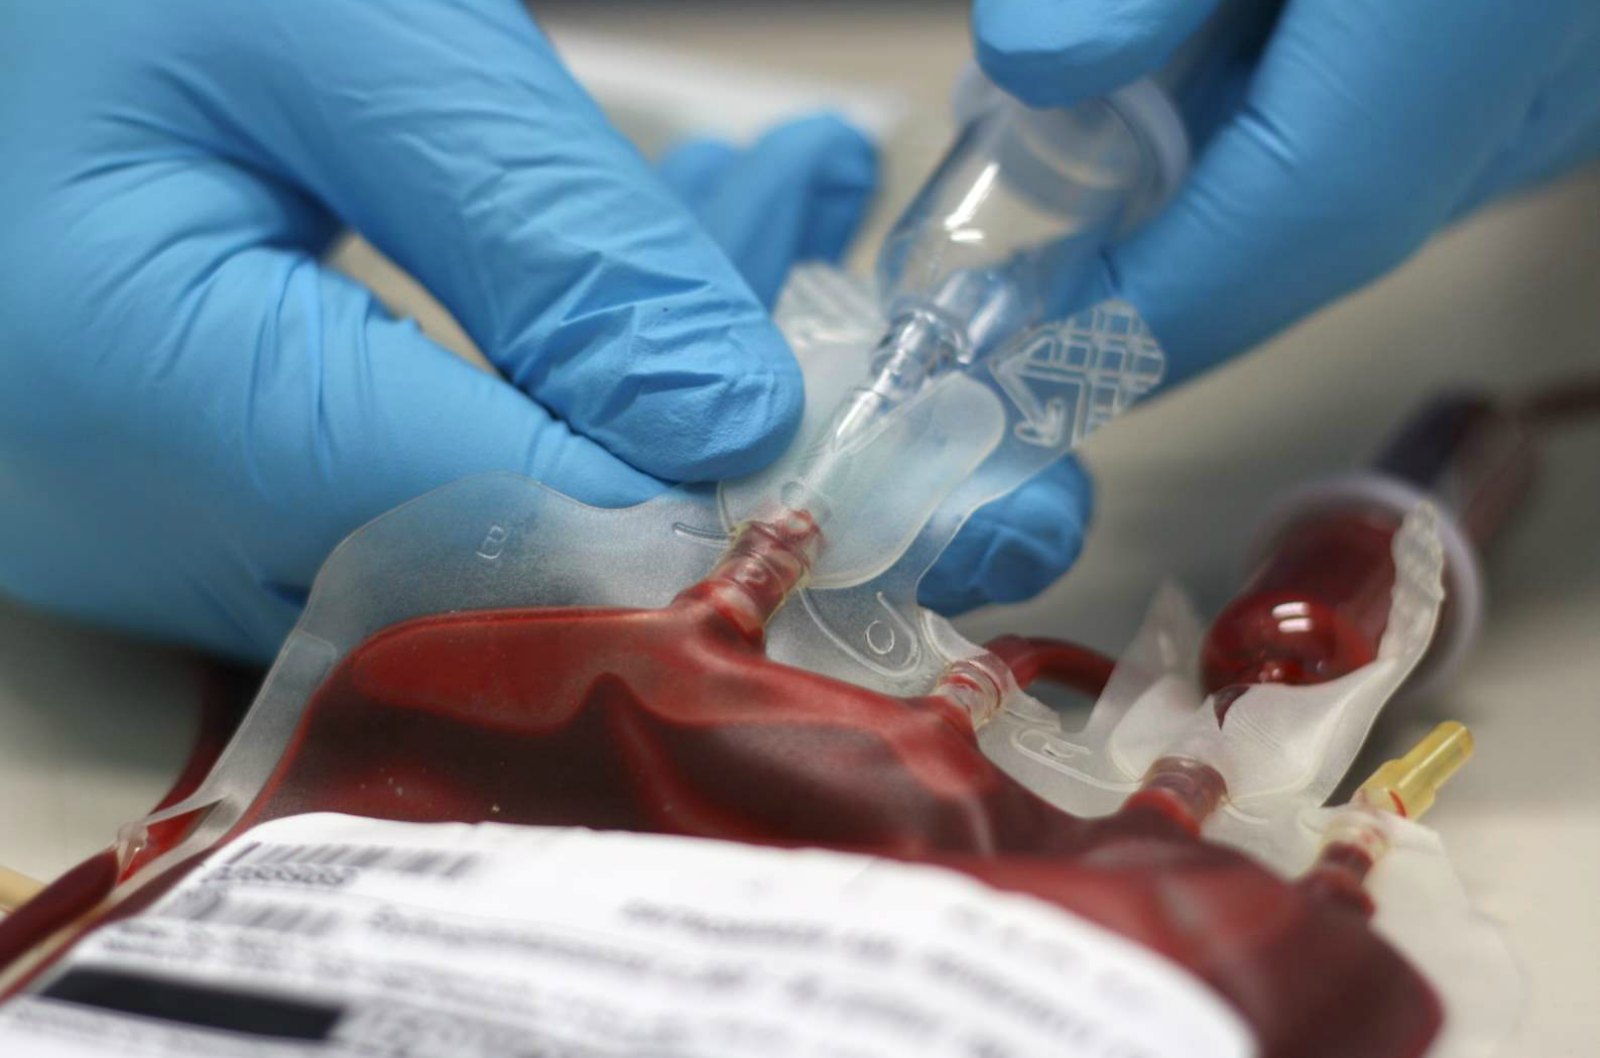 BeadChip Types Platelets for Better Transfusion Outcomes